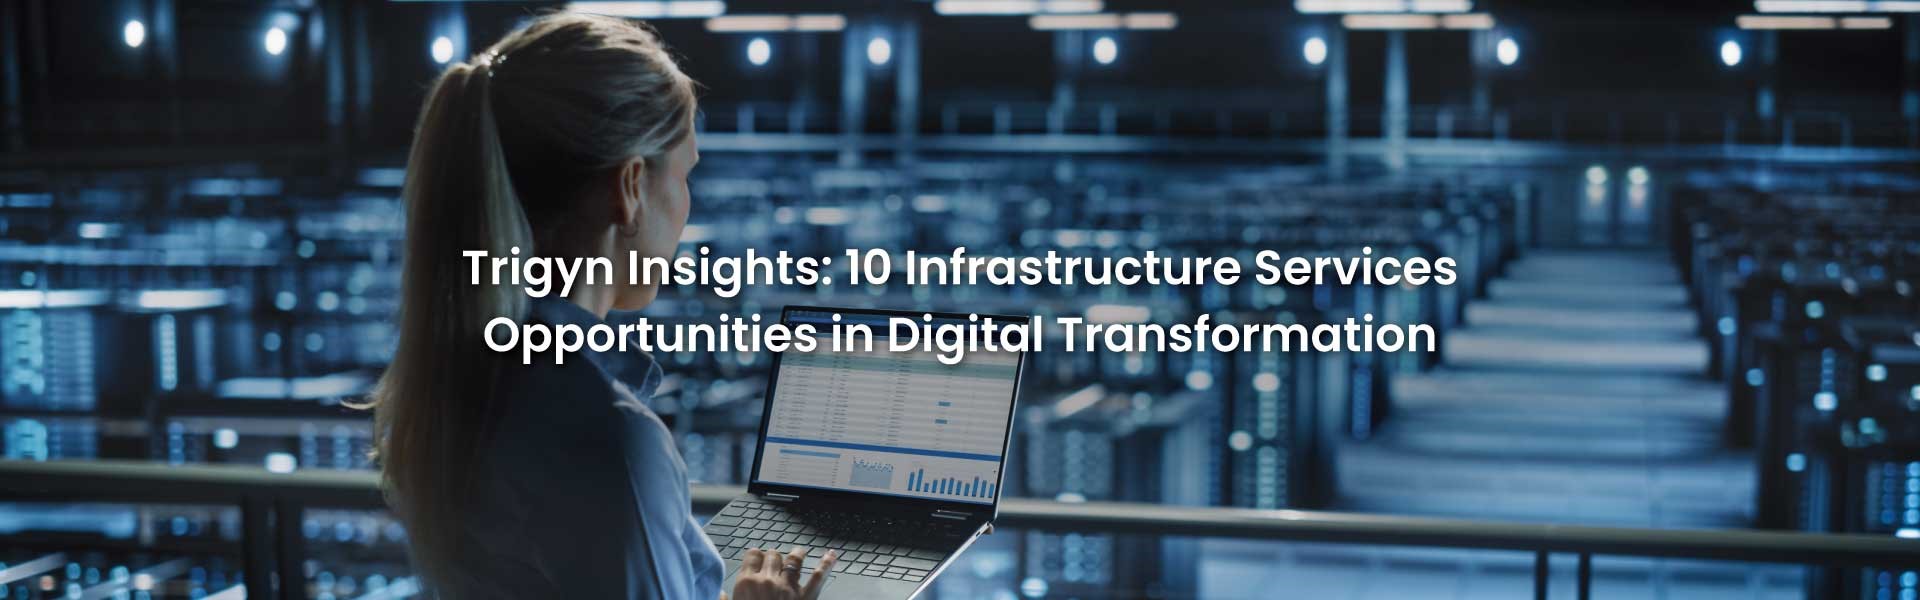 Infrastructure Services in Digital Transformation